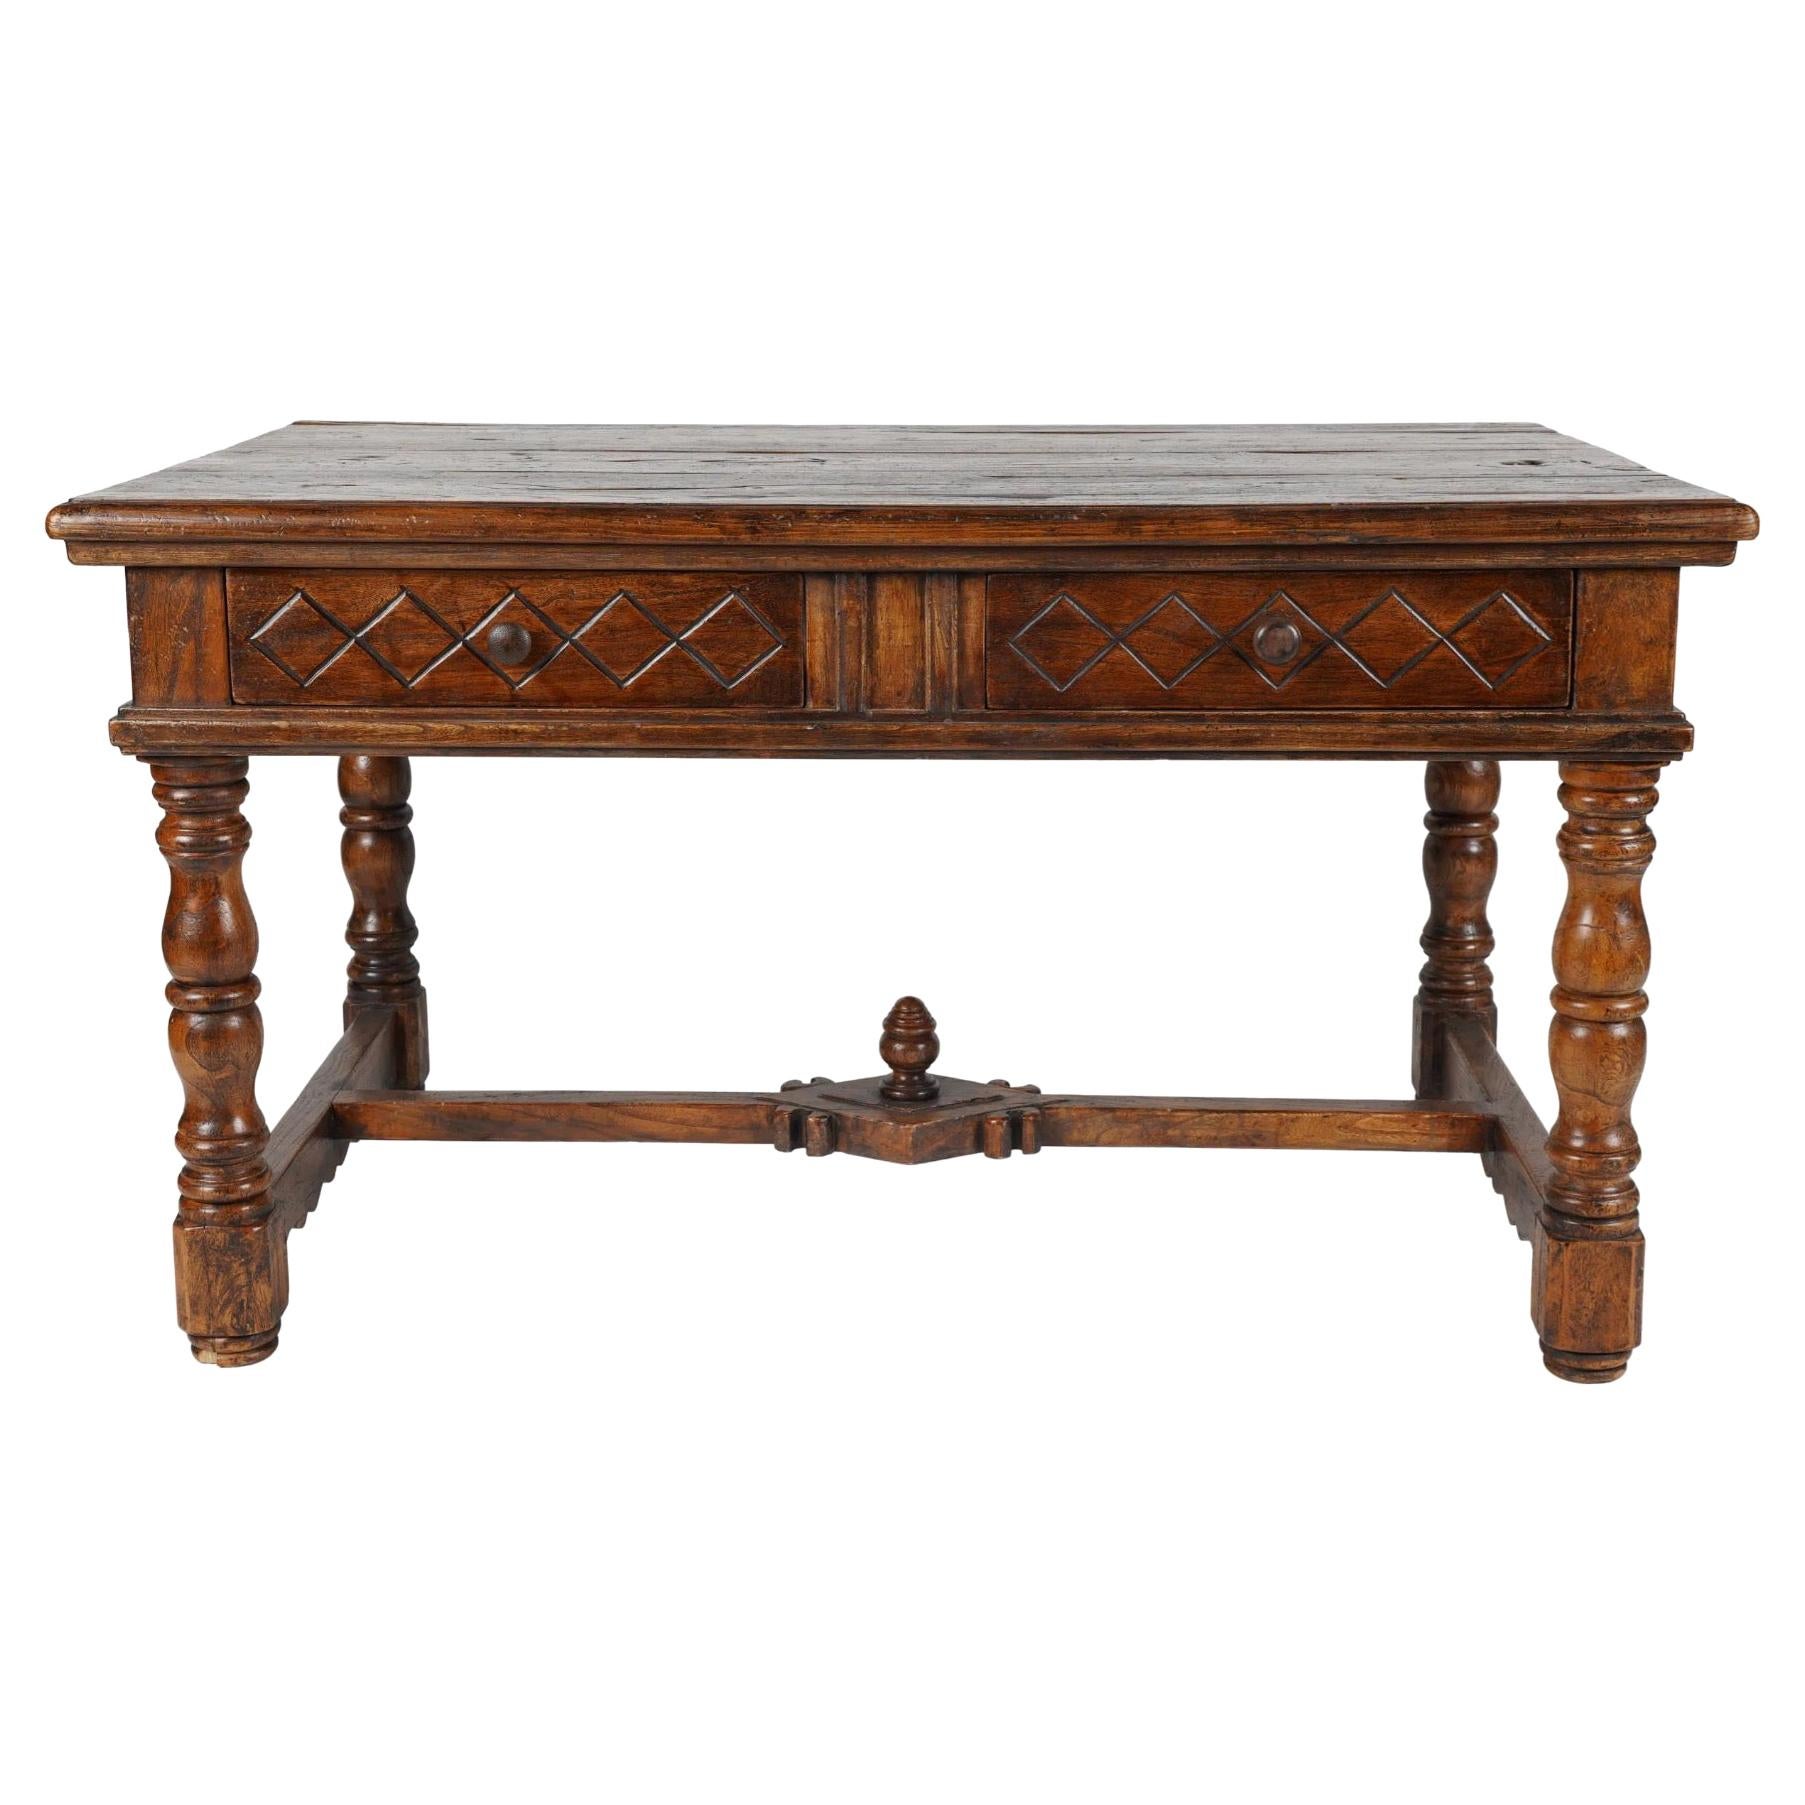 Spanish or Colonial-Style Baroque Writing or Library Table